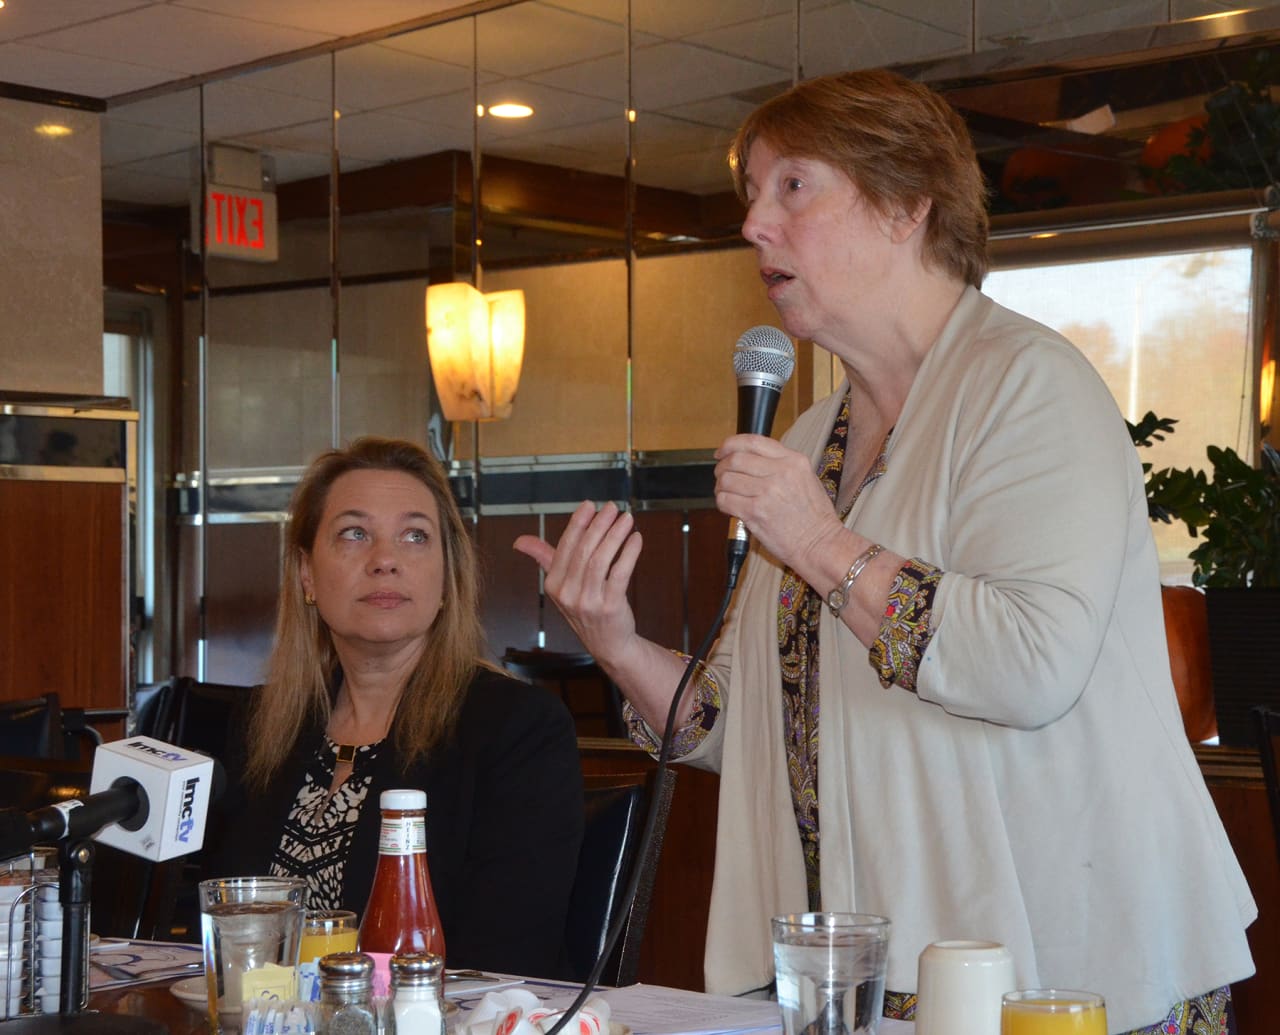 Westchester County Legislator Catherine Parker, left, and Housing Action Council Executive Director Rosemarie Noonan, right, recently spoke about the issues many people face trying to find affordable housing in the county.